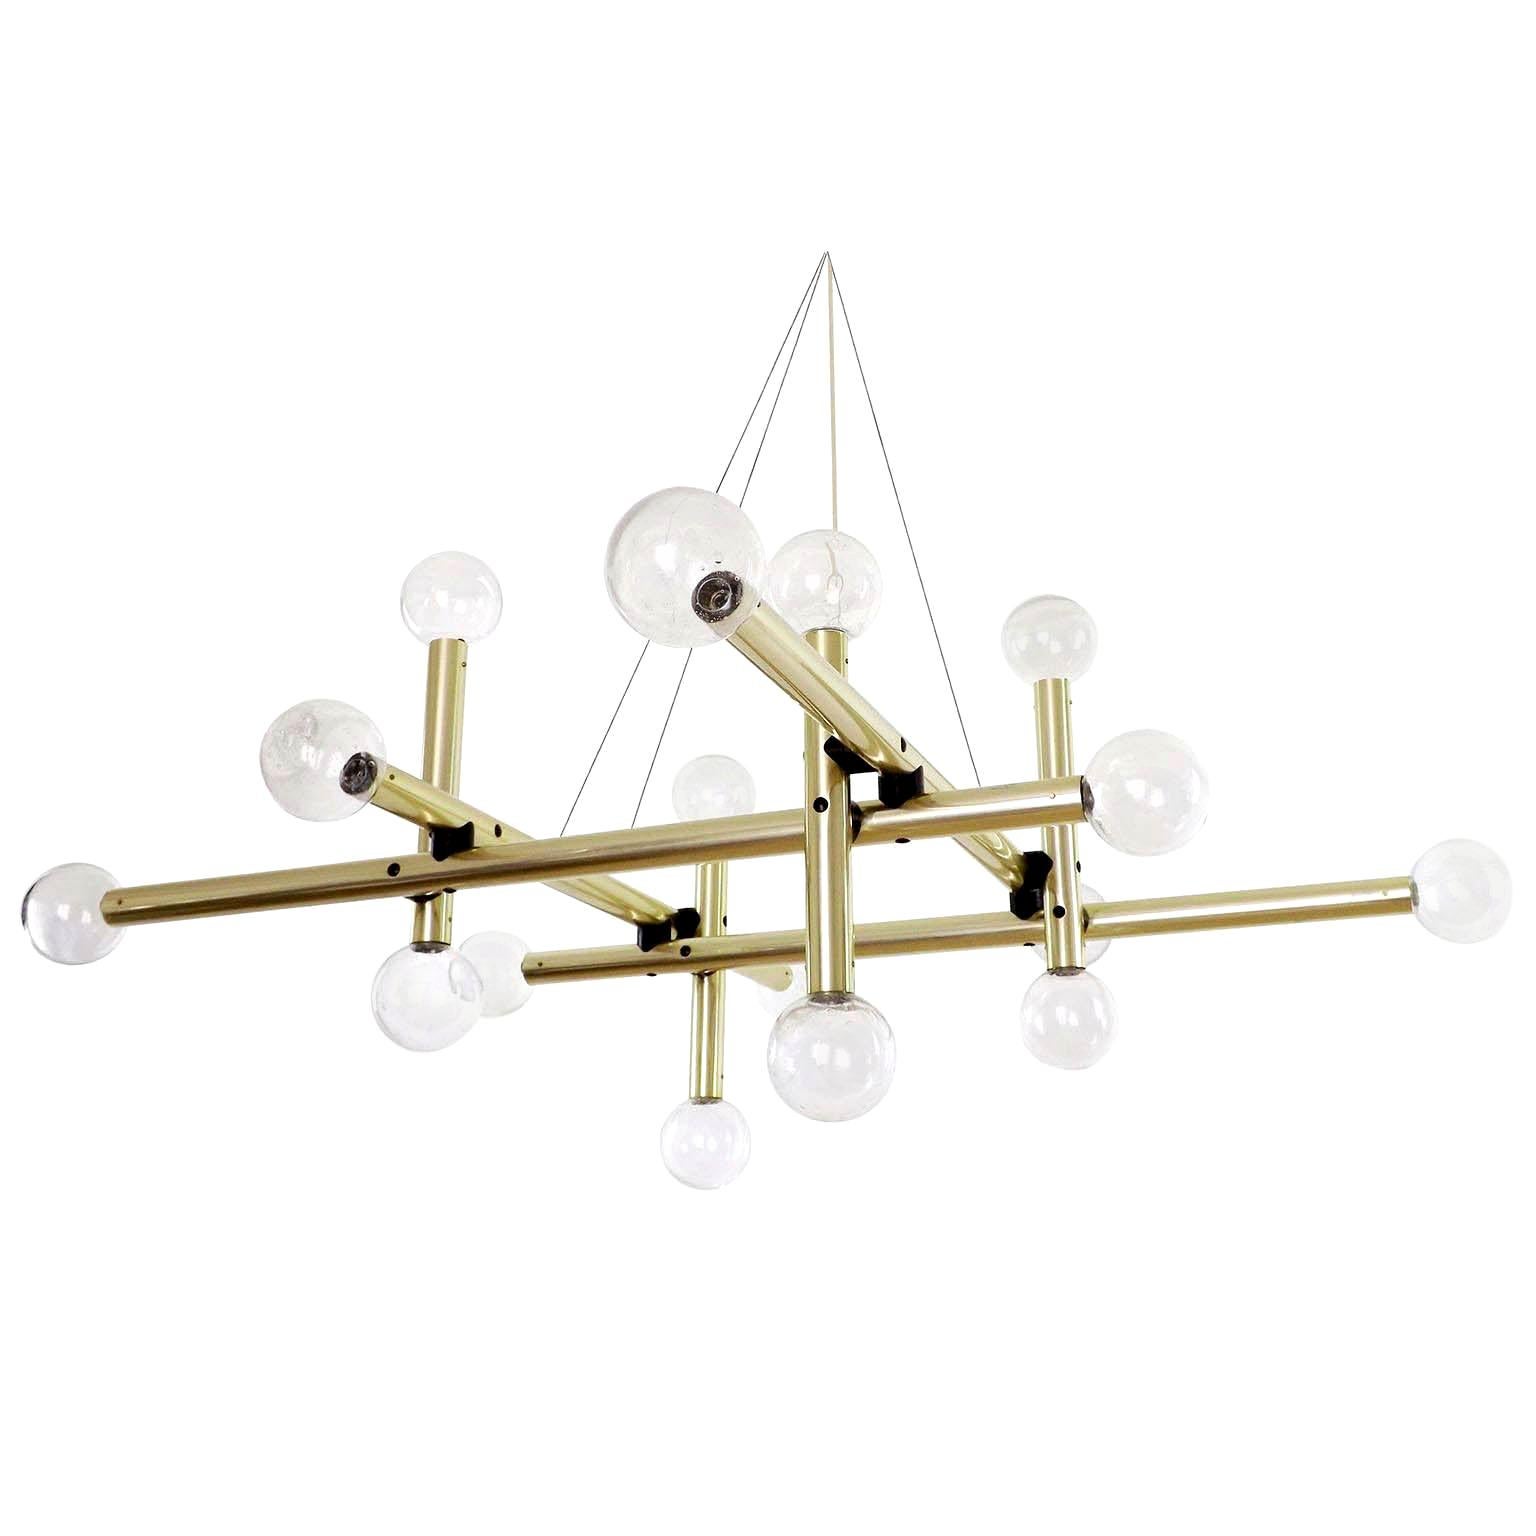 One of  four extremely rare Sputnik or atomic light fixture 'RS 16 HL' by J.T. Kalmar, manufactured in midcentury, Austria, circa 1970 (late 1960s or early 1970s). Only a small number of these large pieces were produced.
It is made of a very